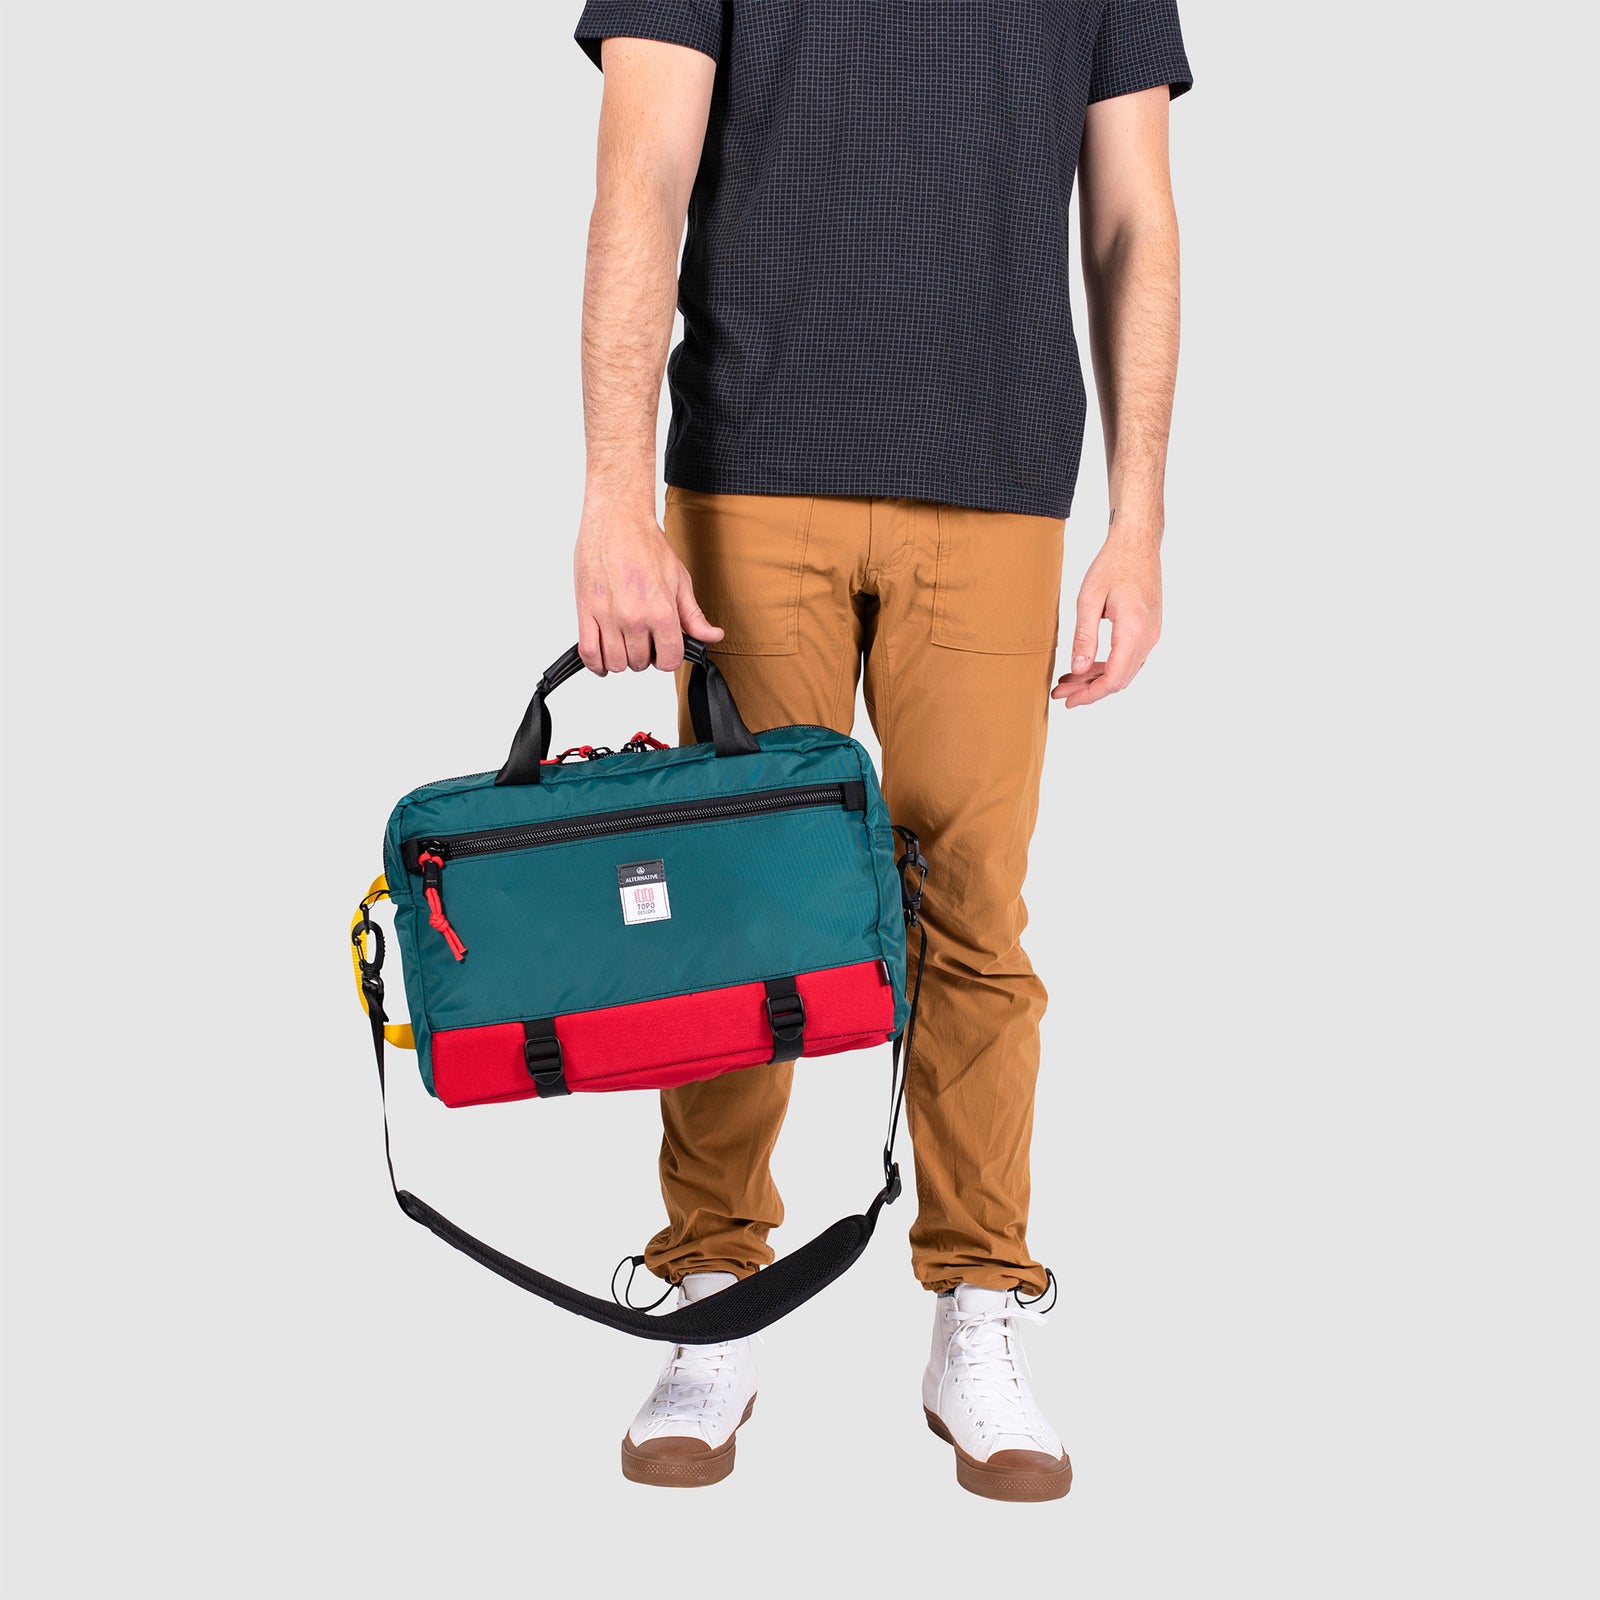 Model shot of Topo Designs x Alternative Commuter Briefcase in red/teal showing briefcase handle carry style